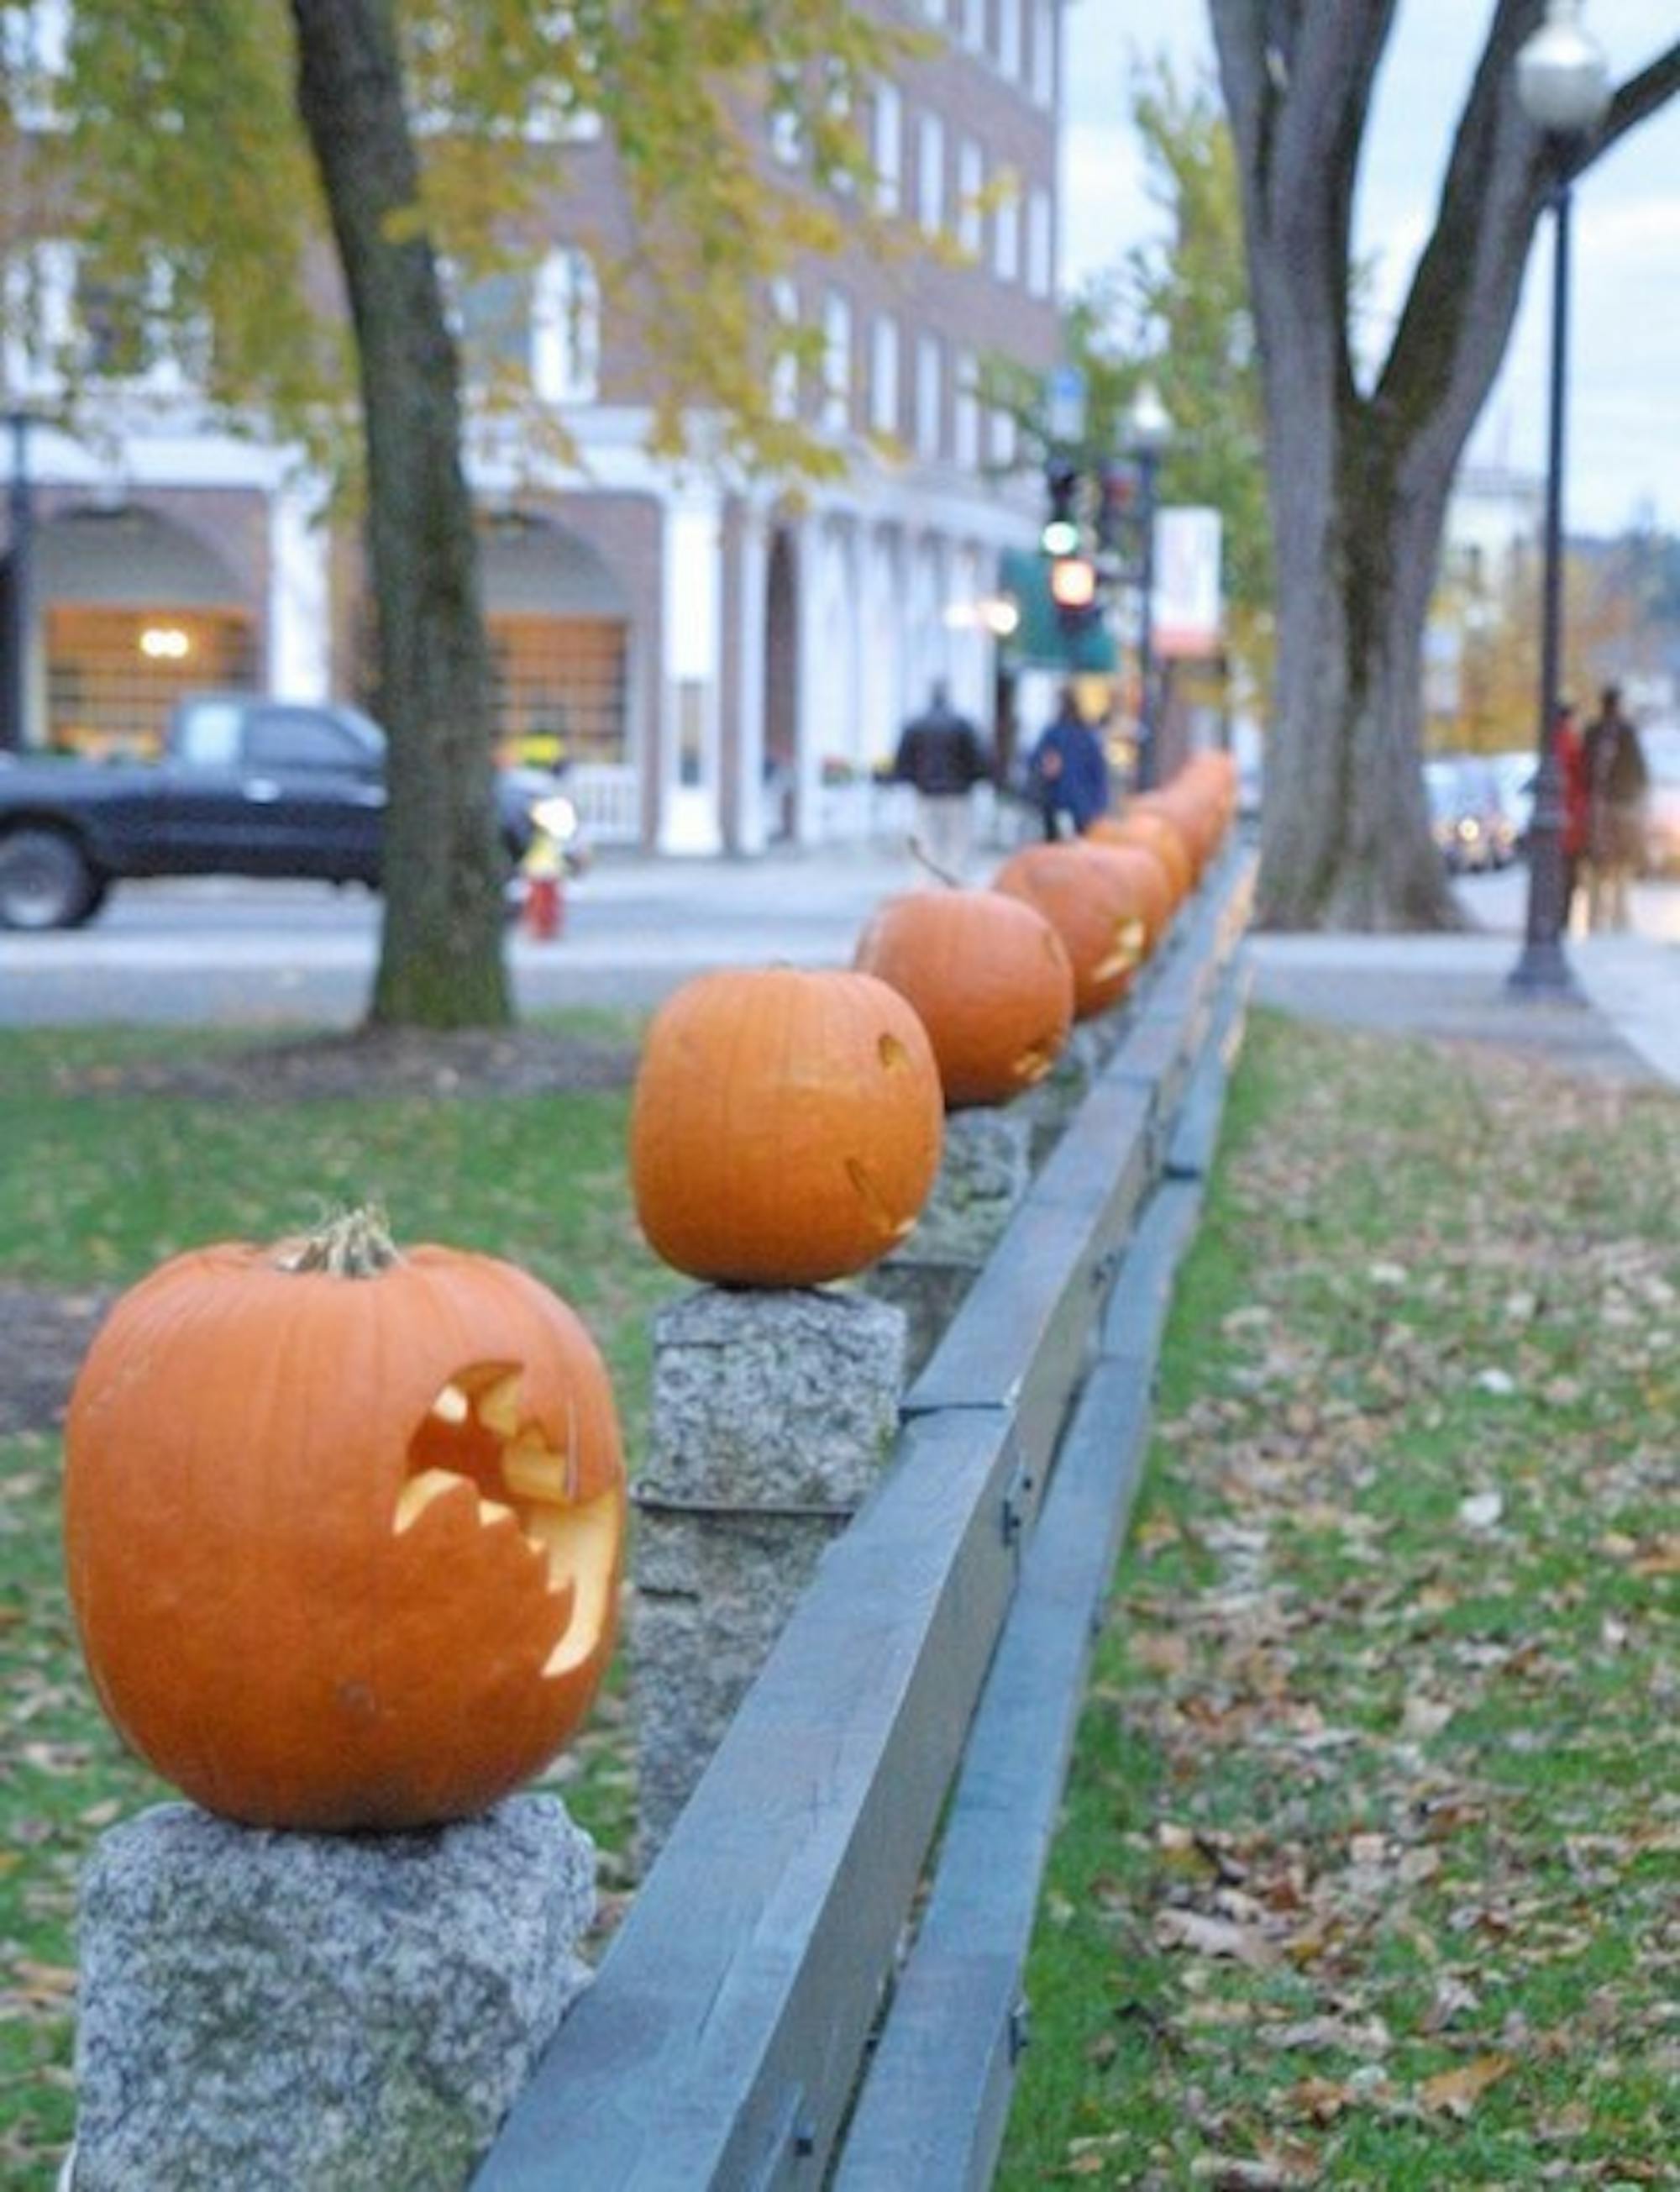 Poor weather this spring has led to a pumpkin shortage as Halloween nears.